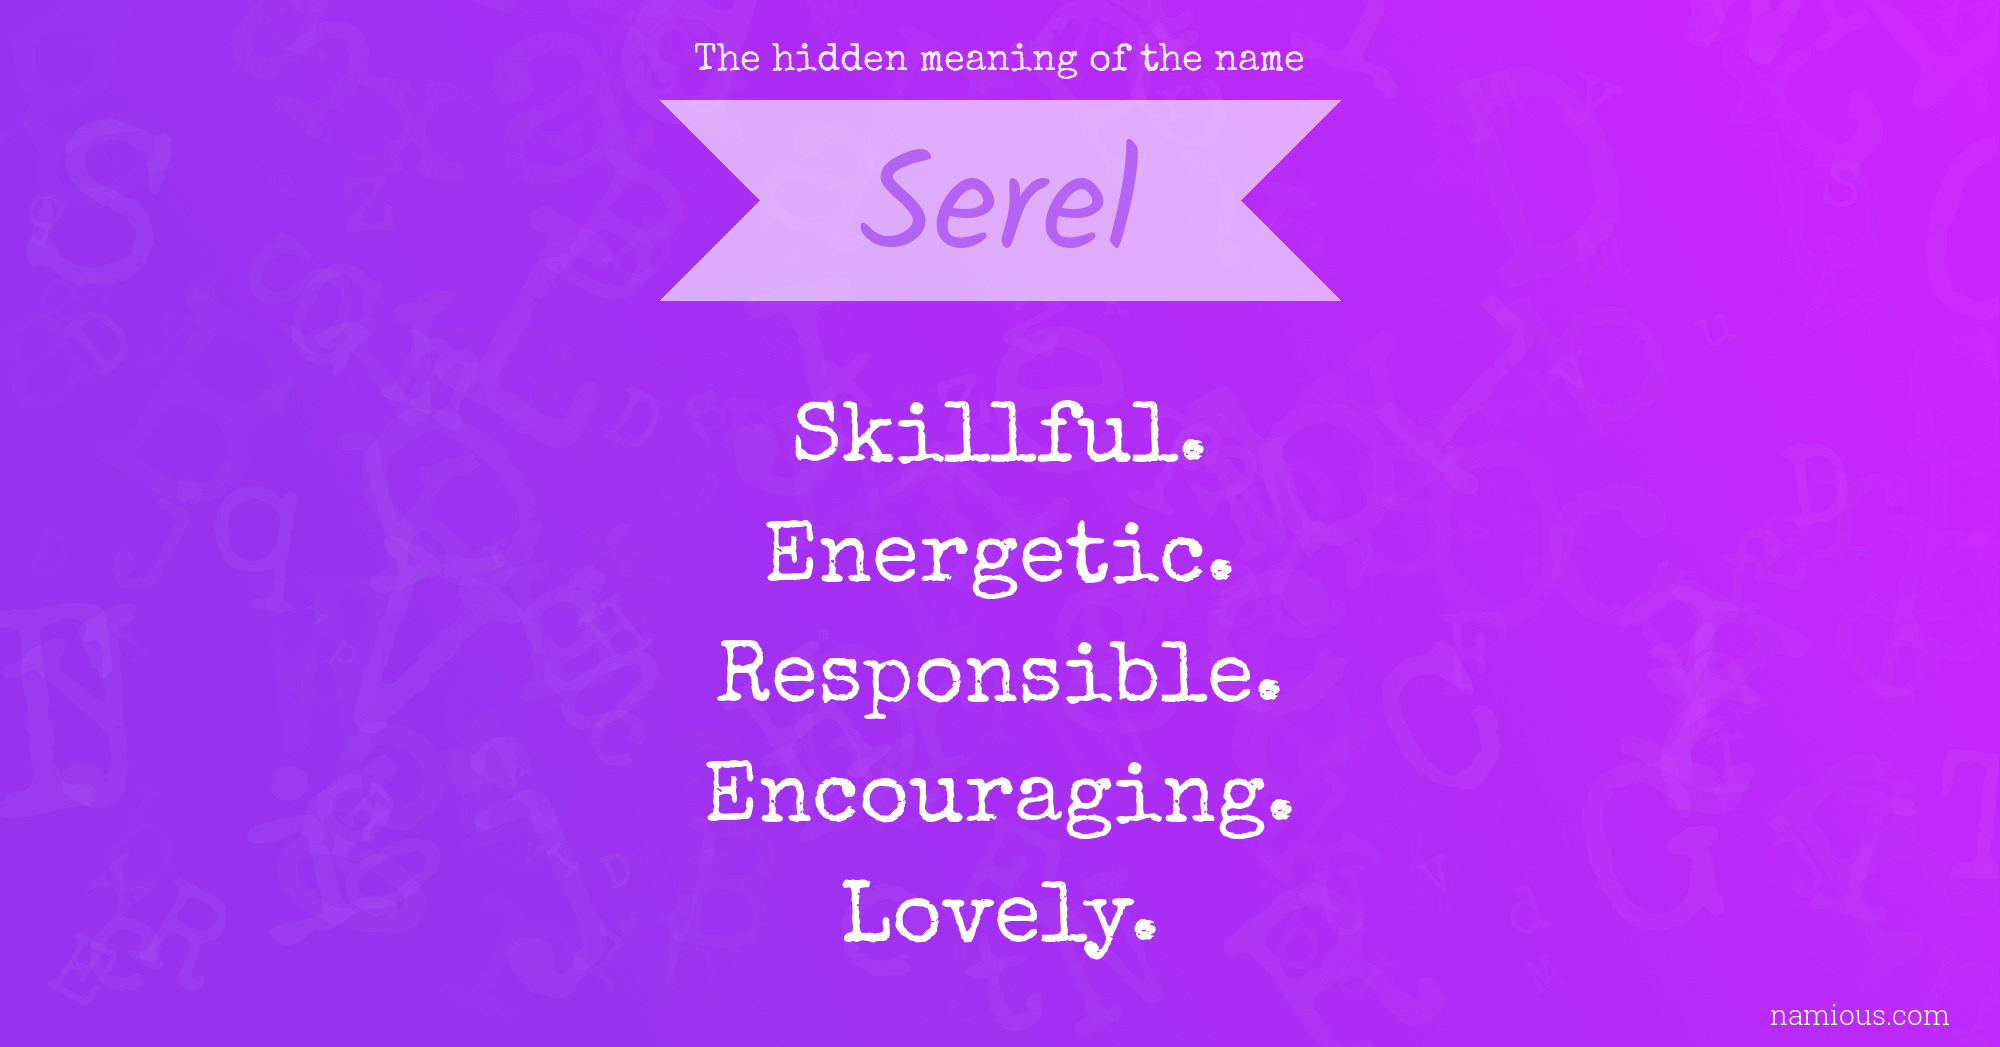 The hidden meaning of the name Serel